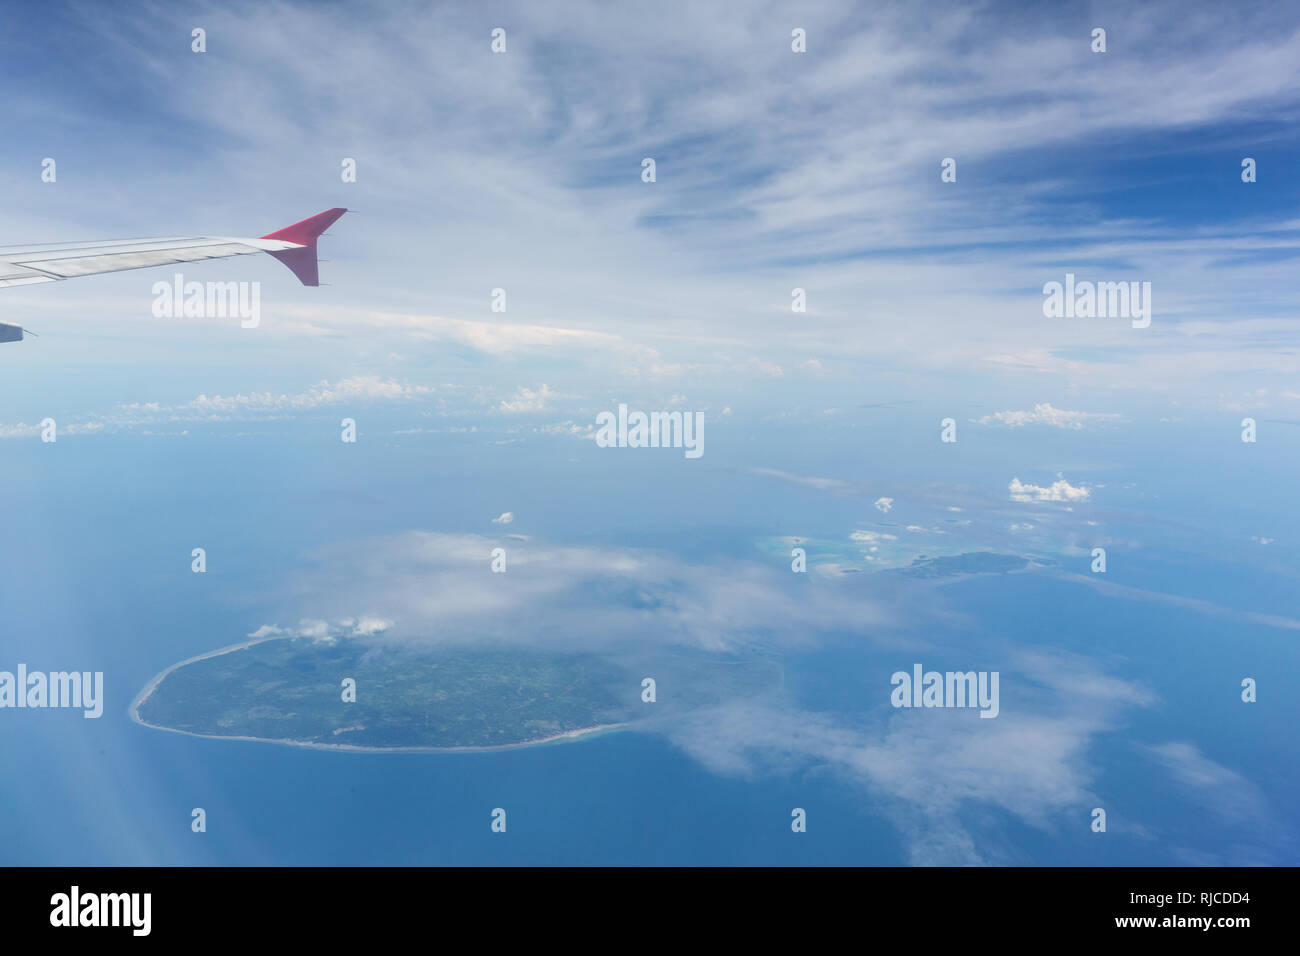 Air plane wing over the land. Can use for airline transportation background. Stock Photo